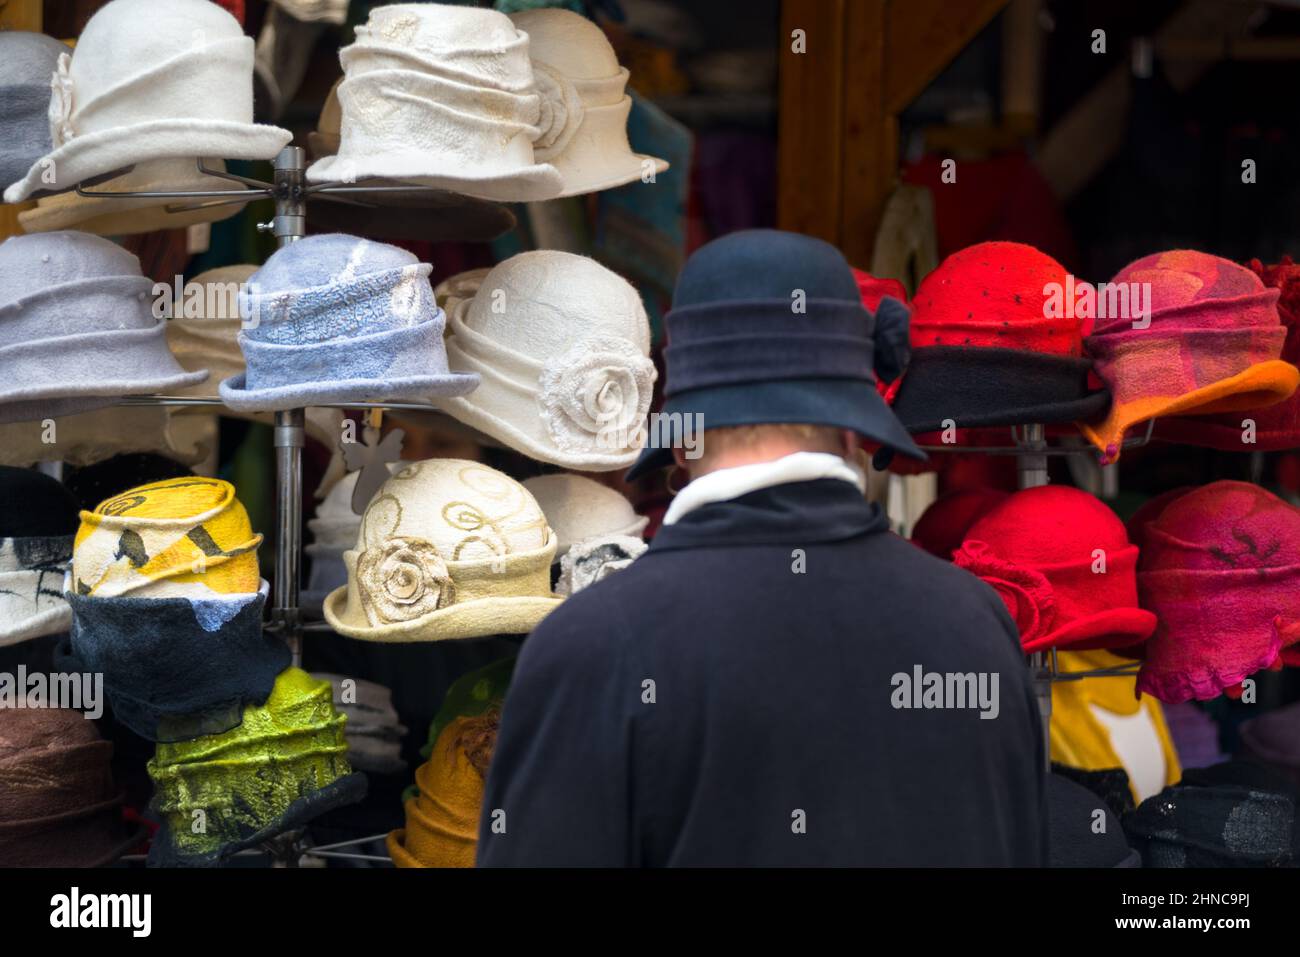 Woman in a felt hat examines the hats of the same style in a shop. Rear view Stock Photo